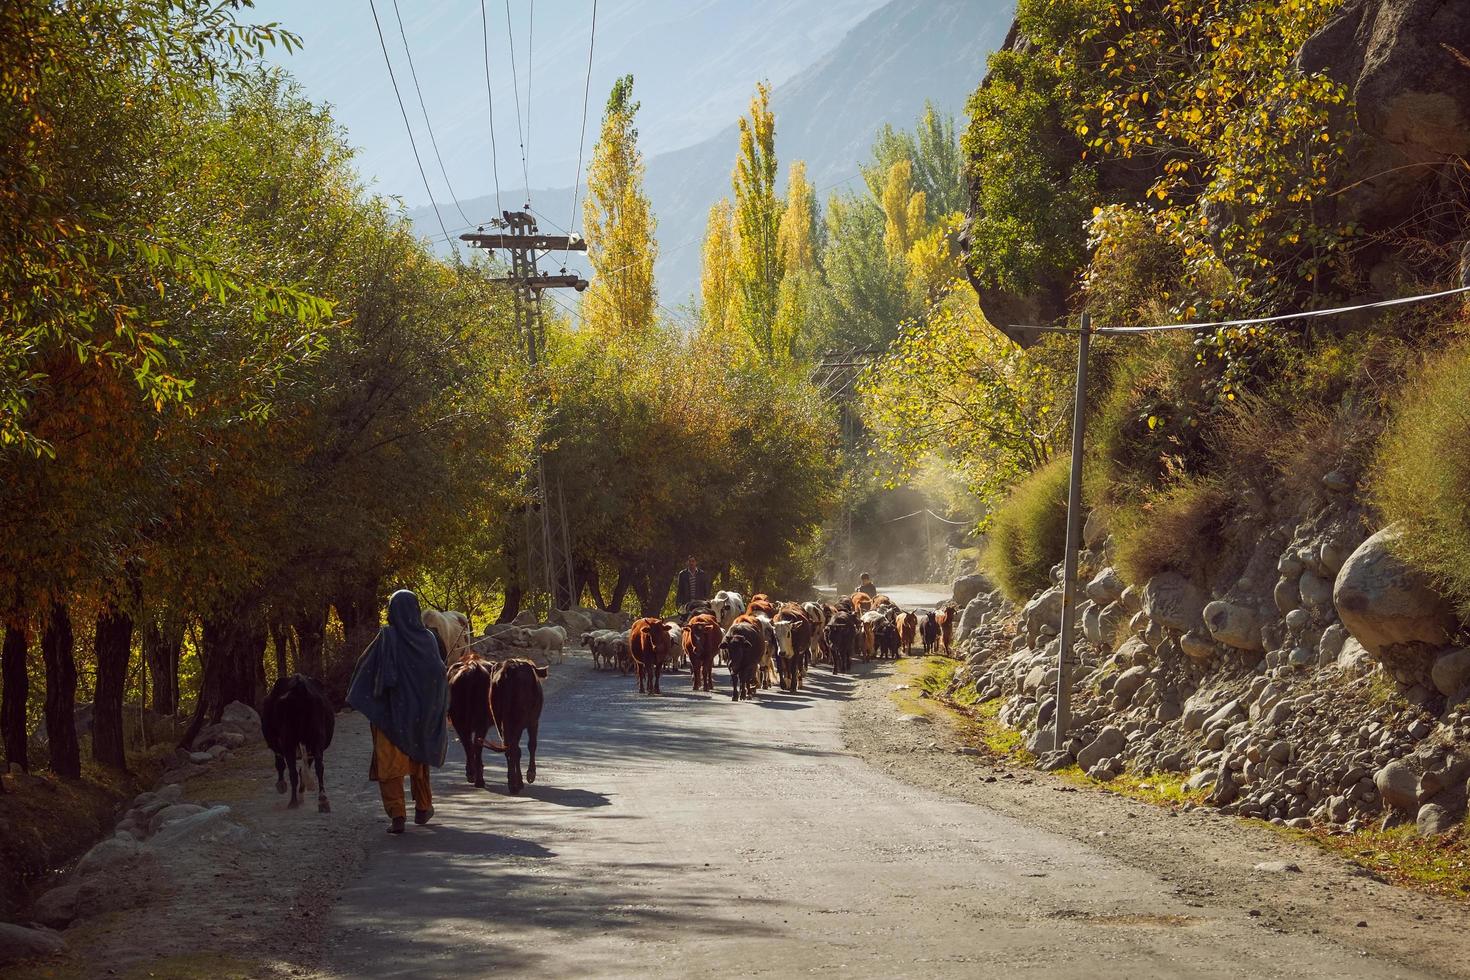 Gilgit Baltistan,Pakistan,2017 - Local shepherds and flock of cows sheep and goats walking on the road in countryside. Autumn season in Ghizer valley. photo